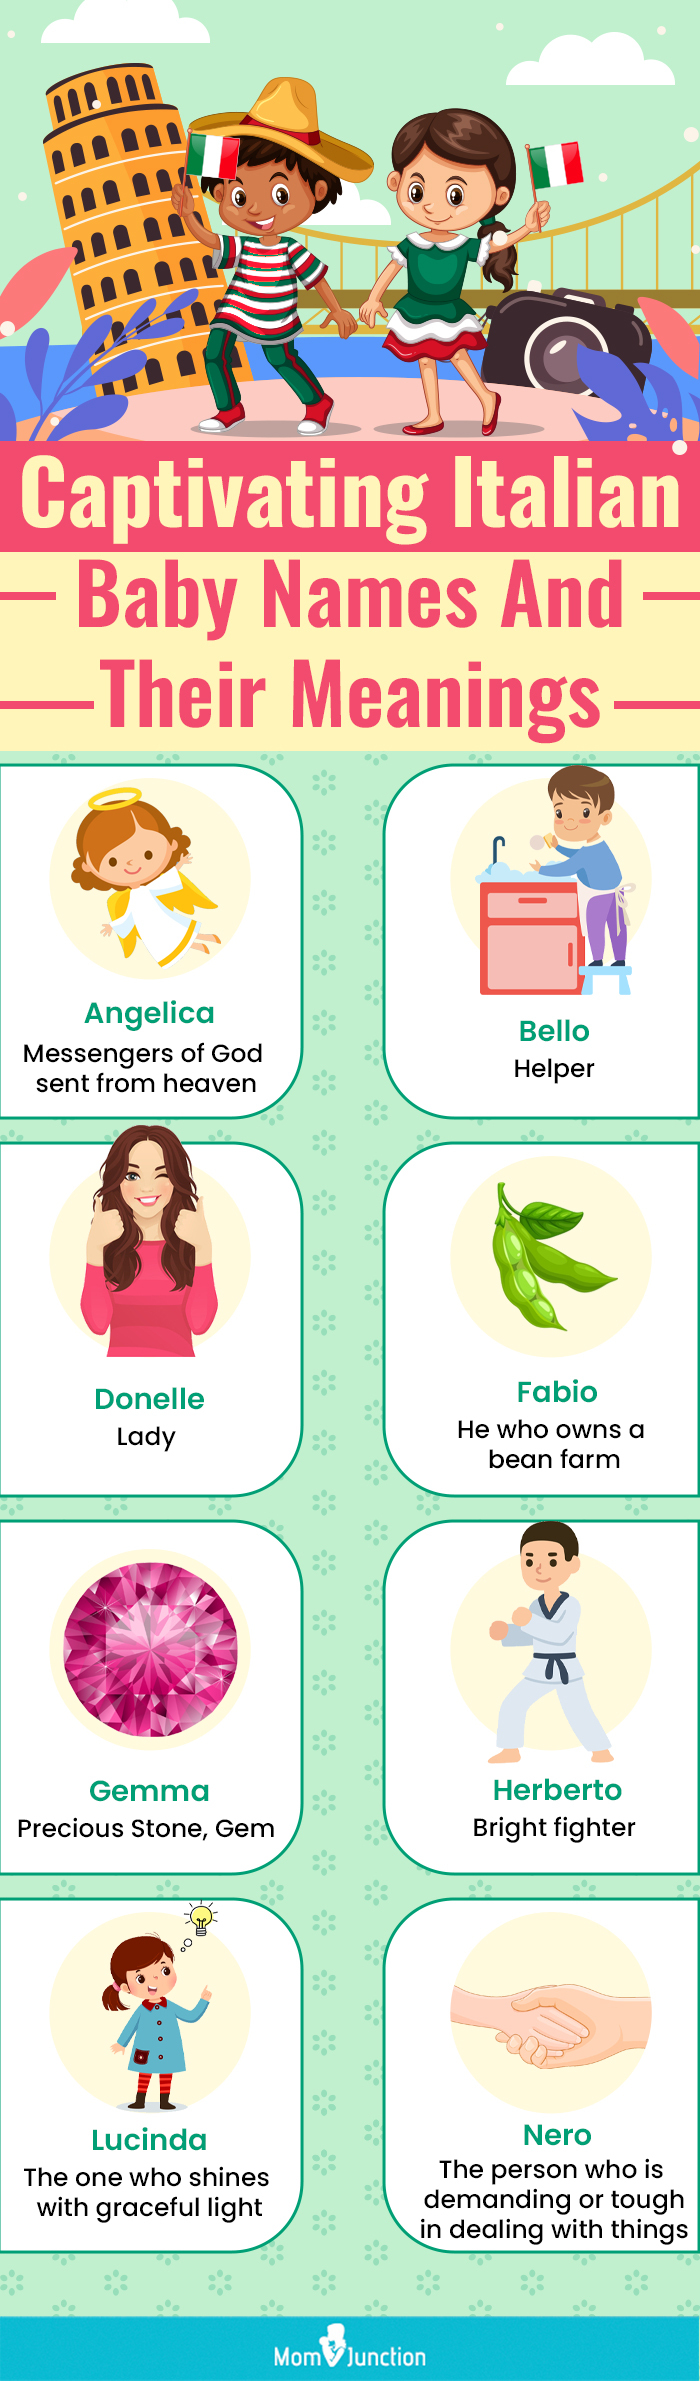 captivating italian baby names and their meanings (infographic)